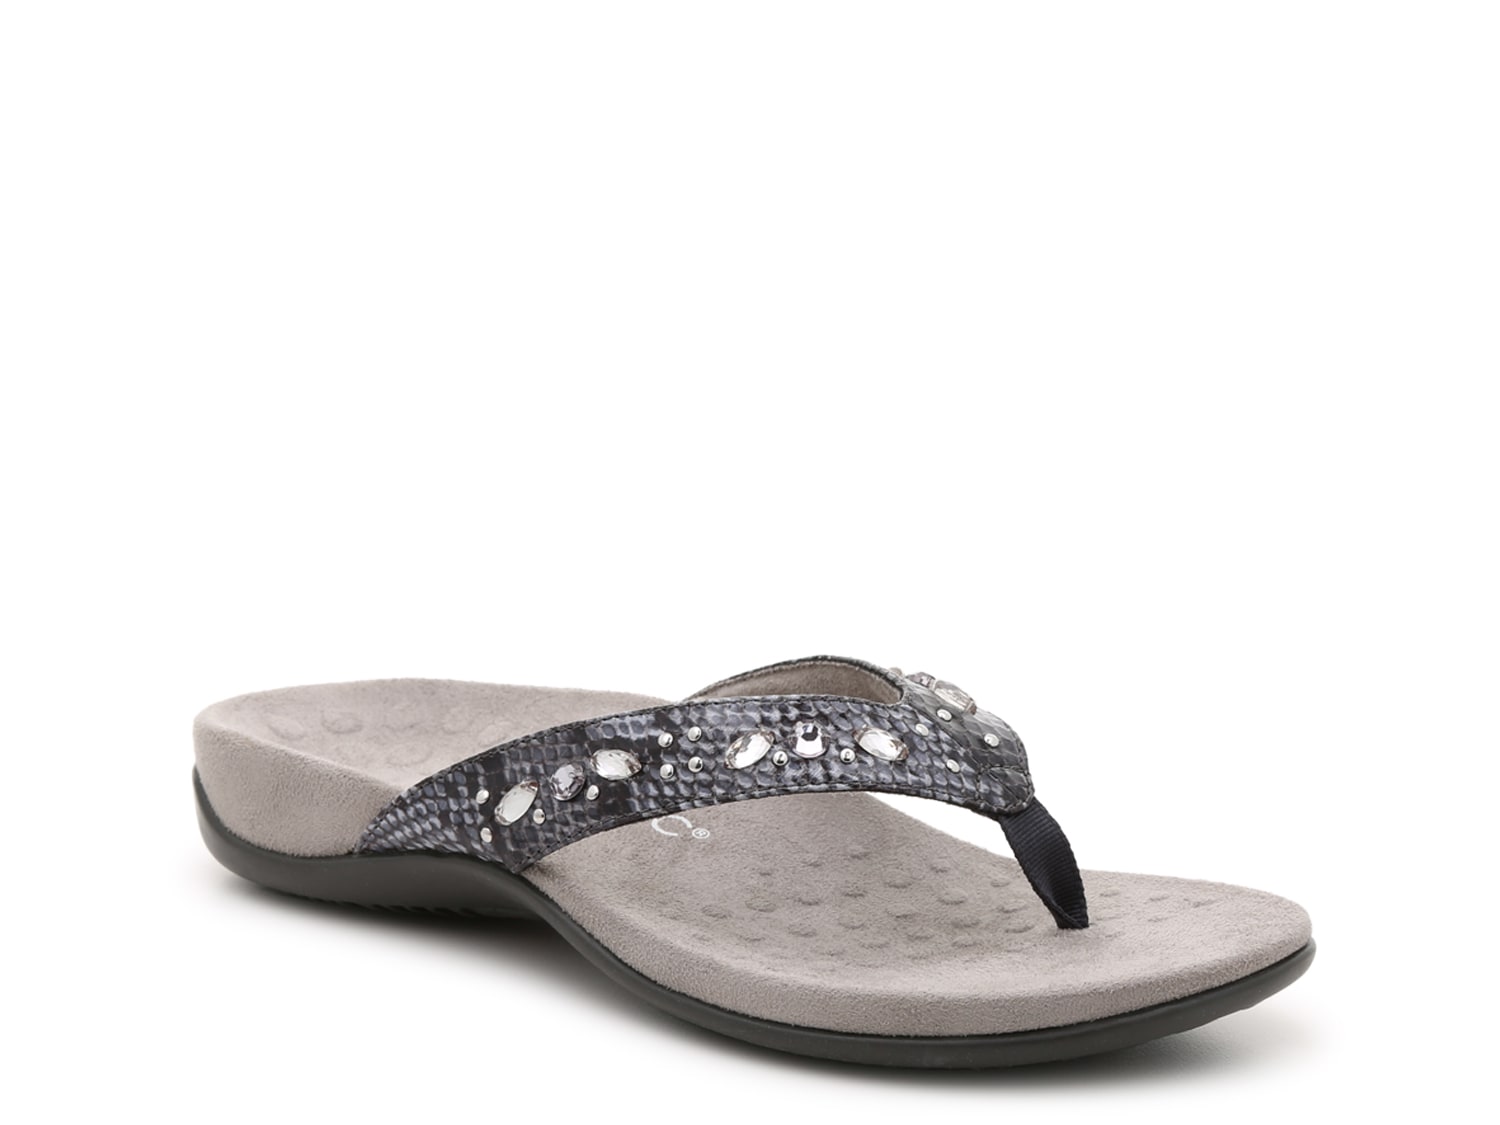 Vionic Lucia Flip Flop - Free Shipping | DSW